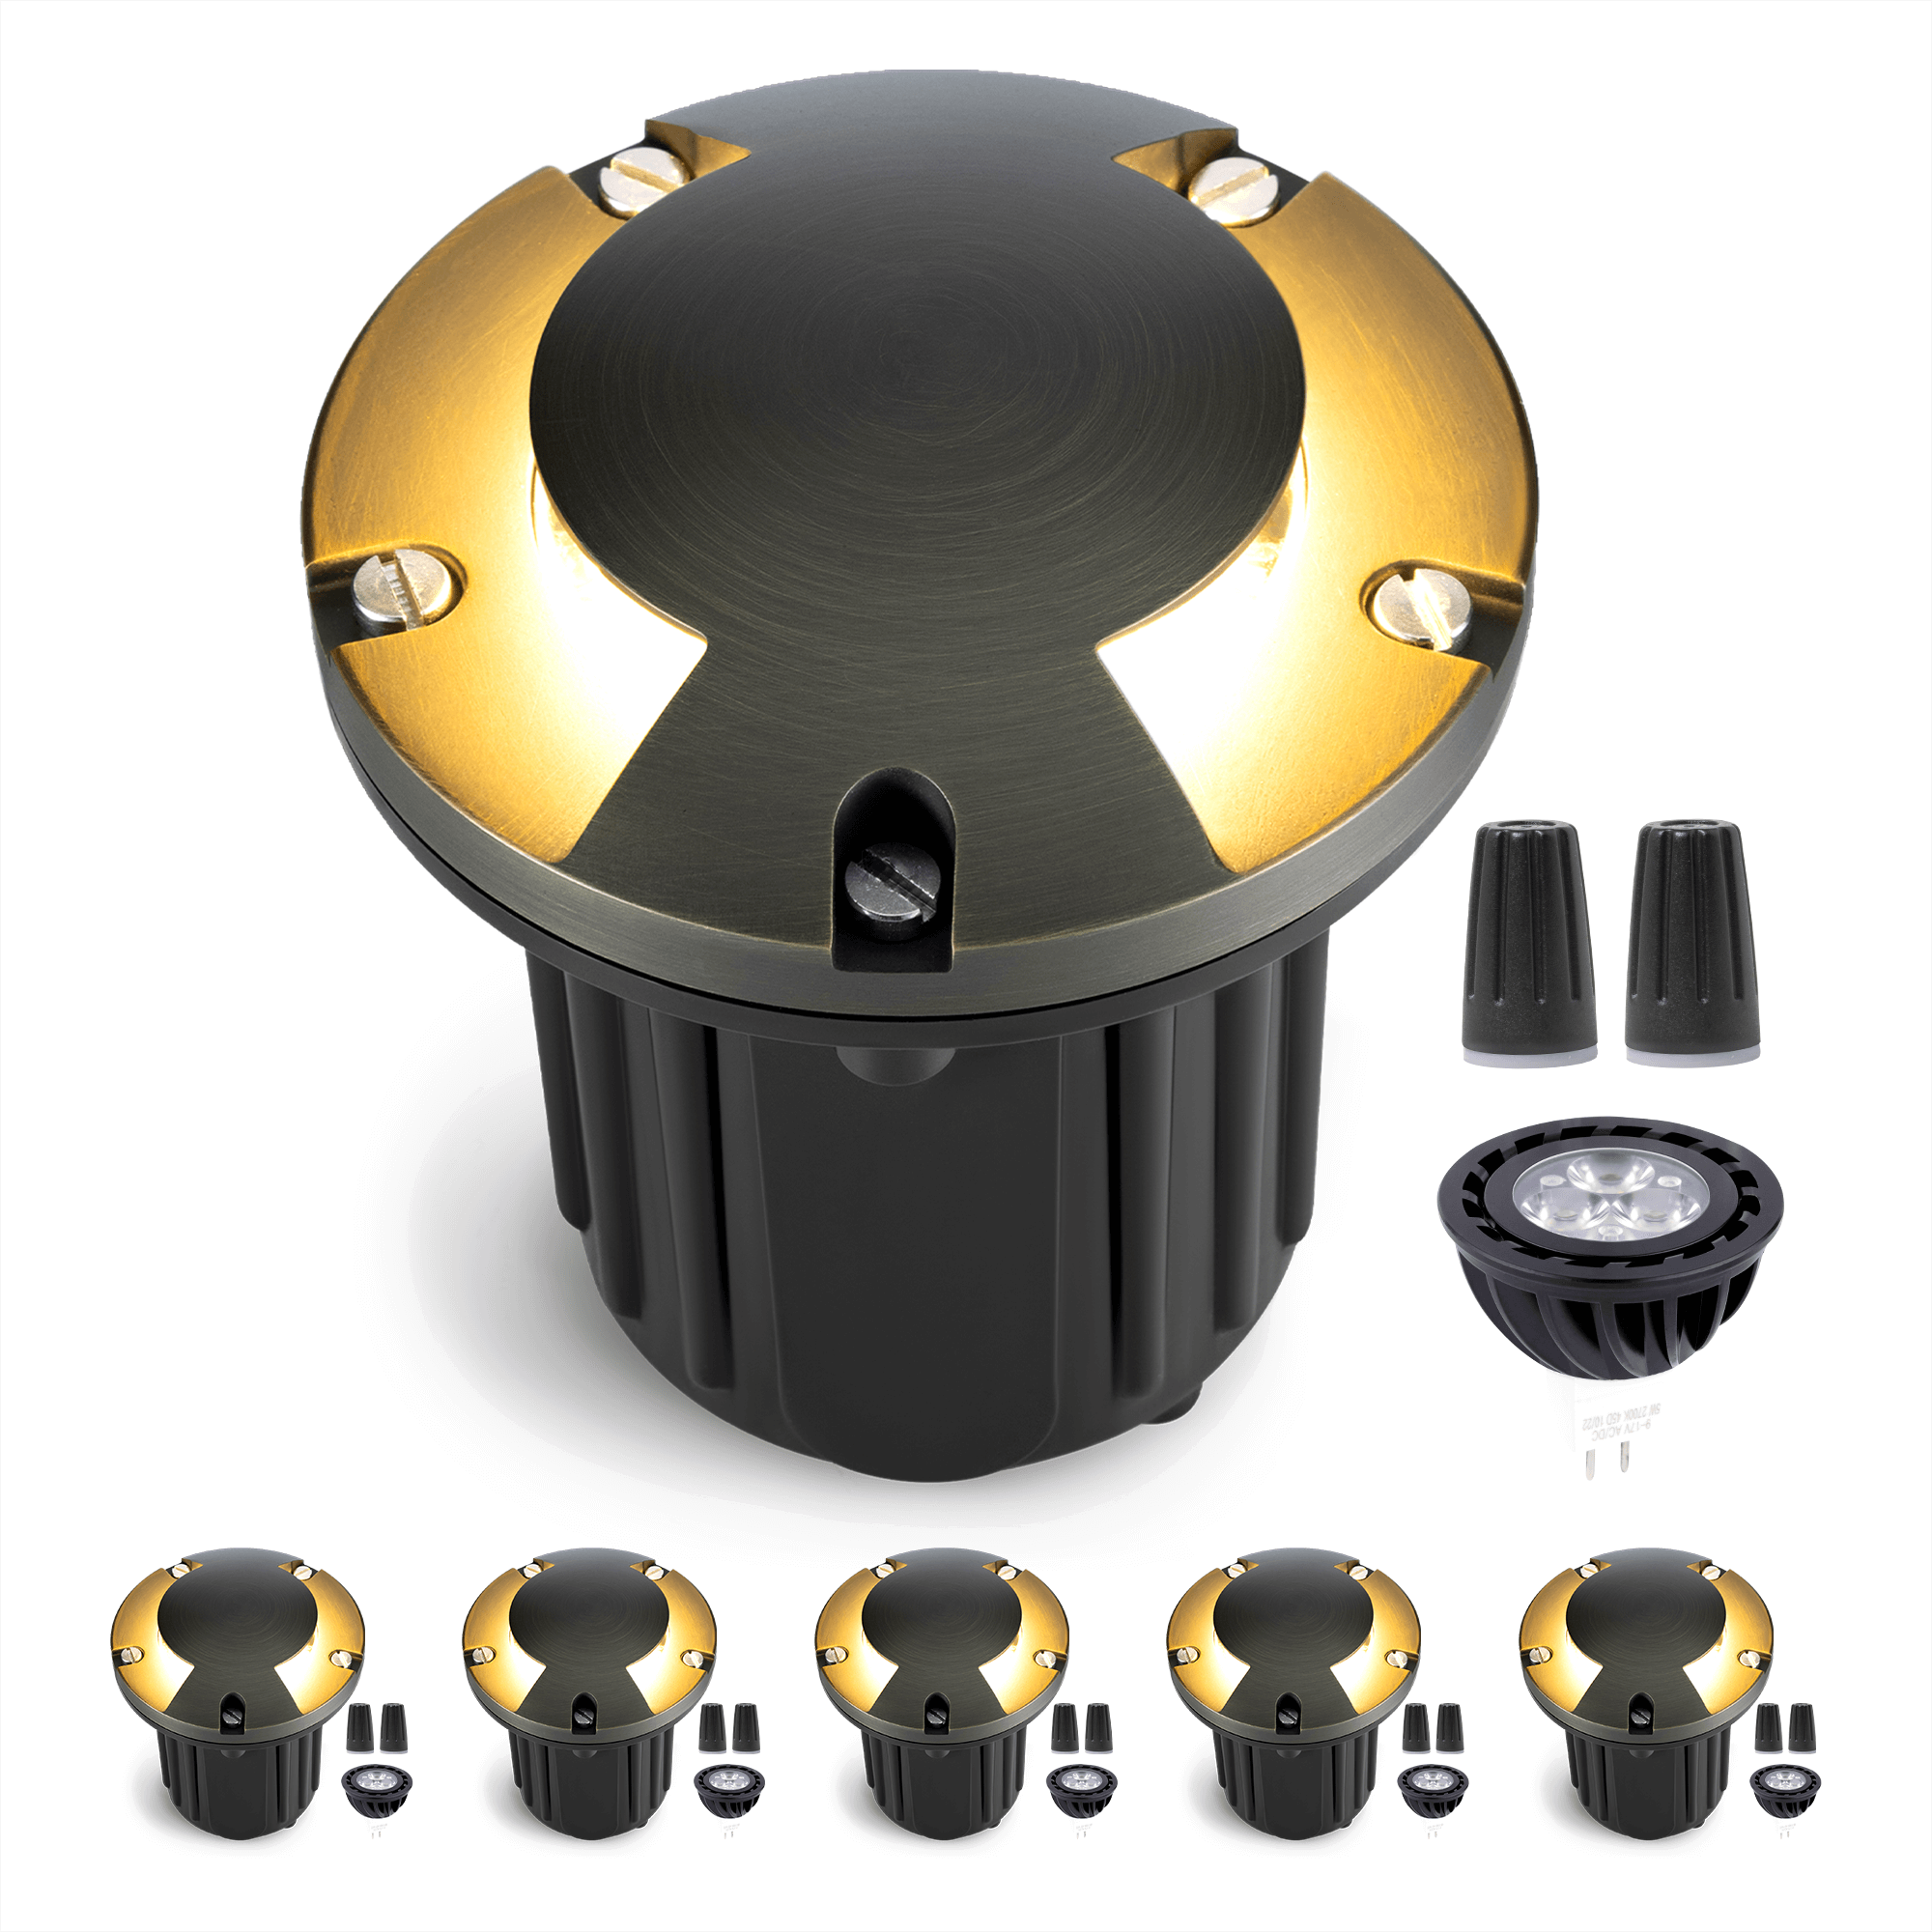 Gardenreet Landscape Well Lights Brass, LED Low Voltage Outdoor In Ground  Lights, 12V Waterproof Garden Lights Wired Beacon Top for Outside Driveway